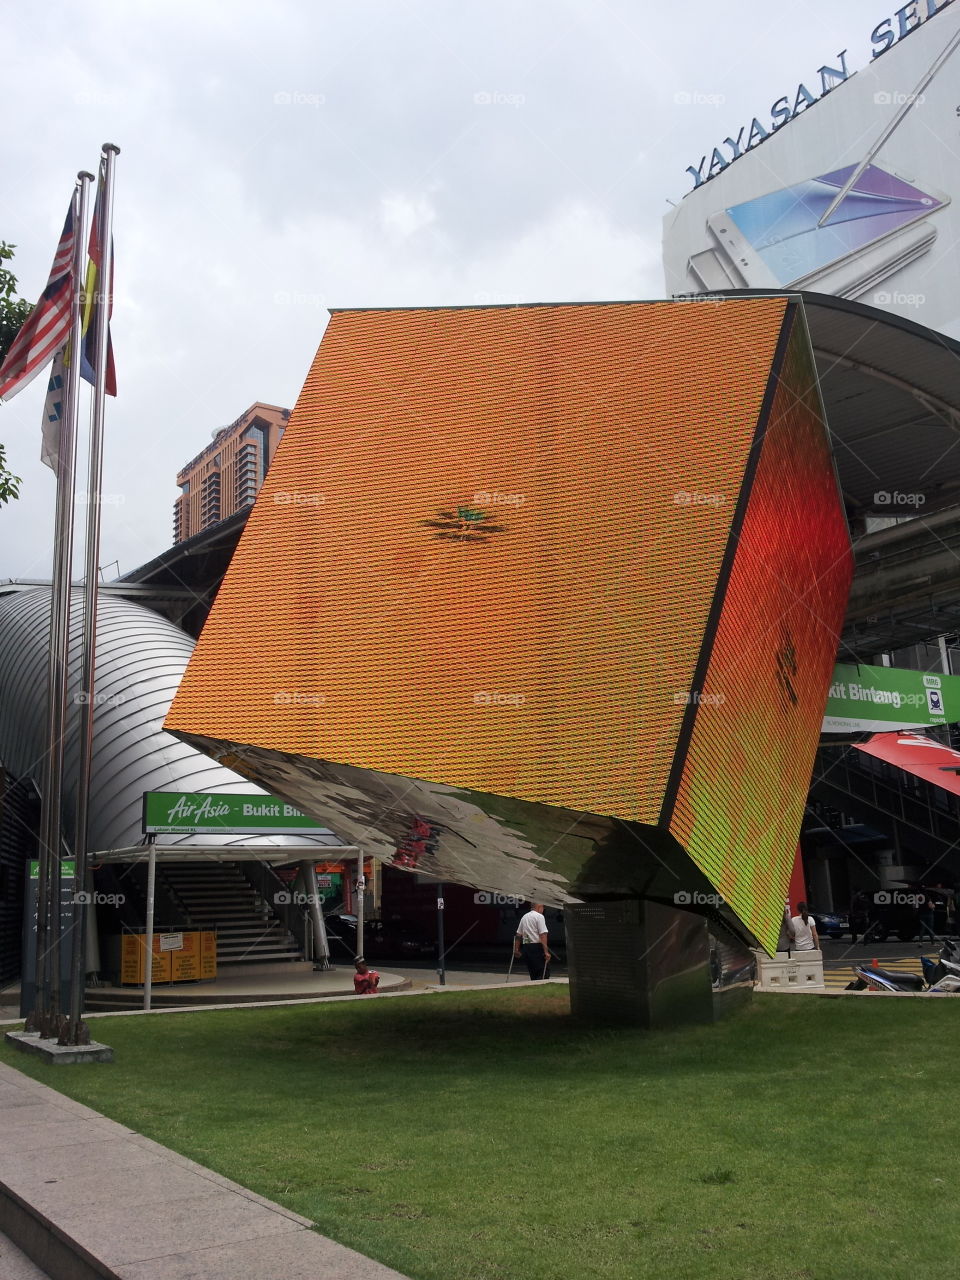 Big cube. this is a big cube in time square in kuala Lumpur